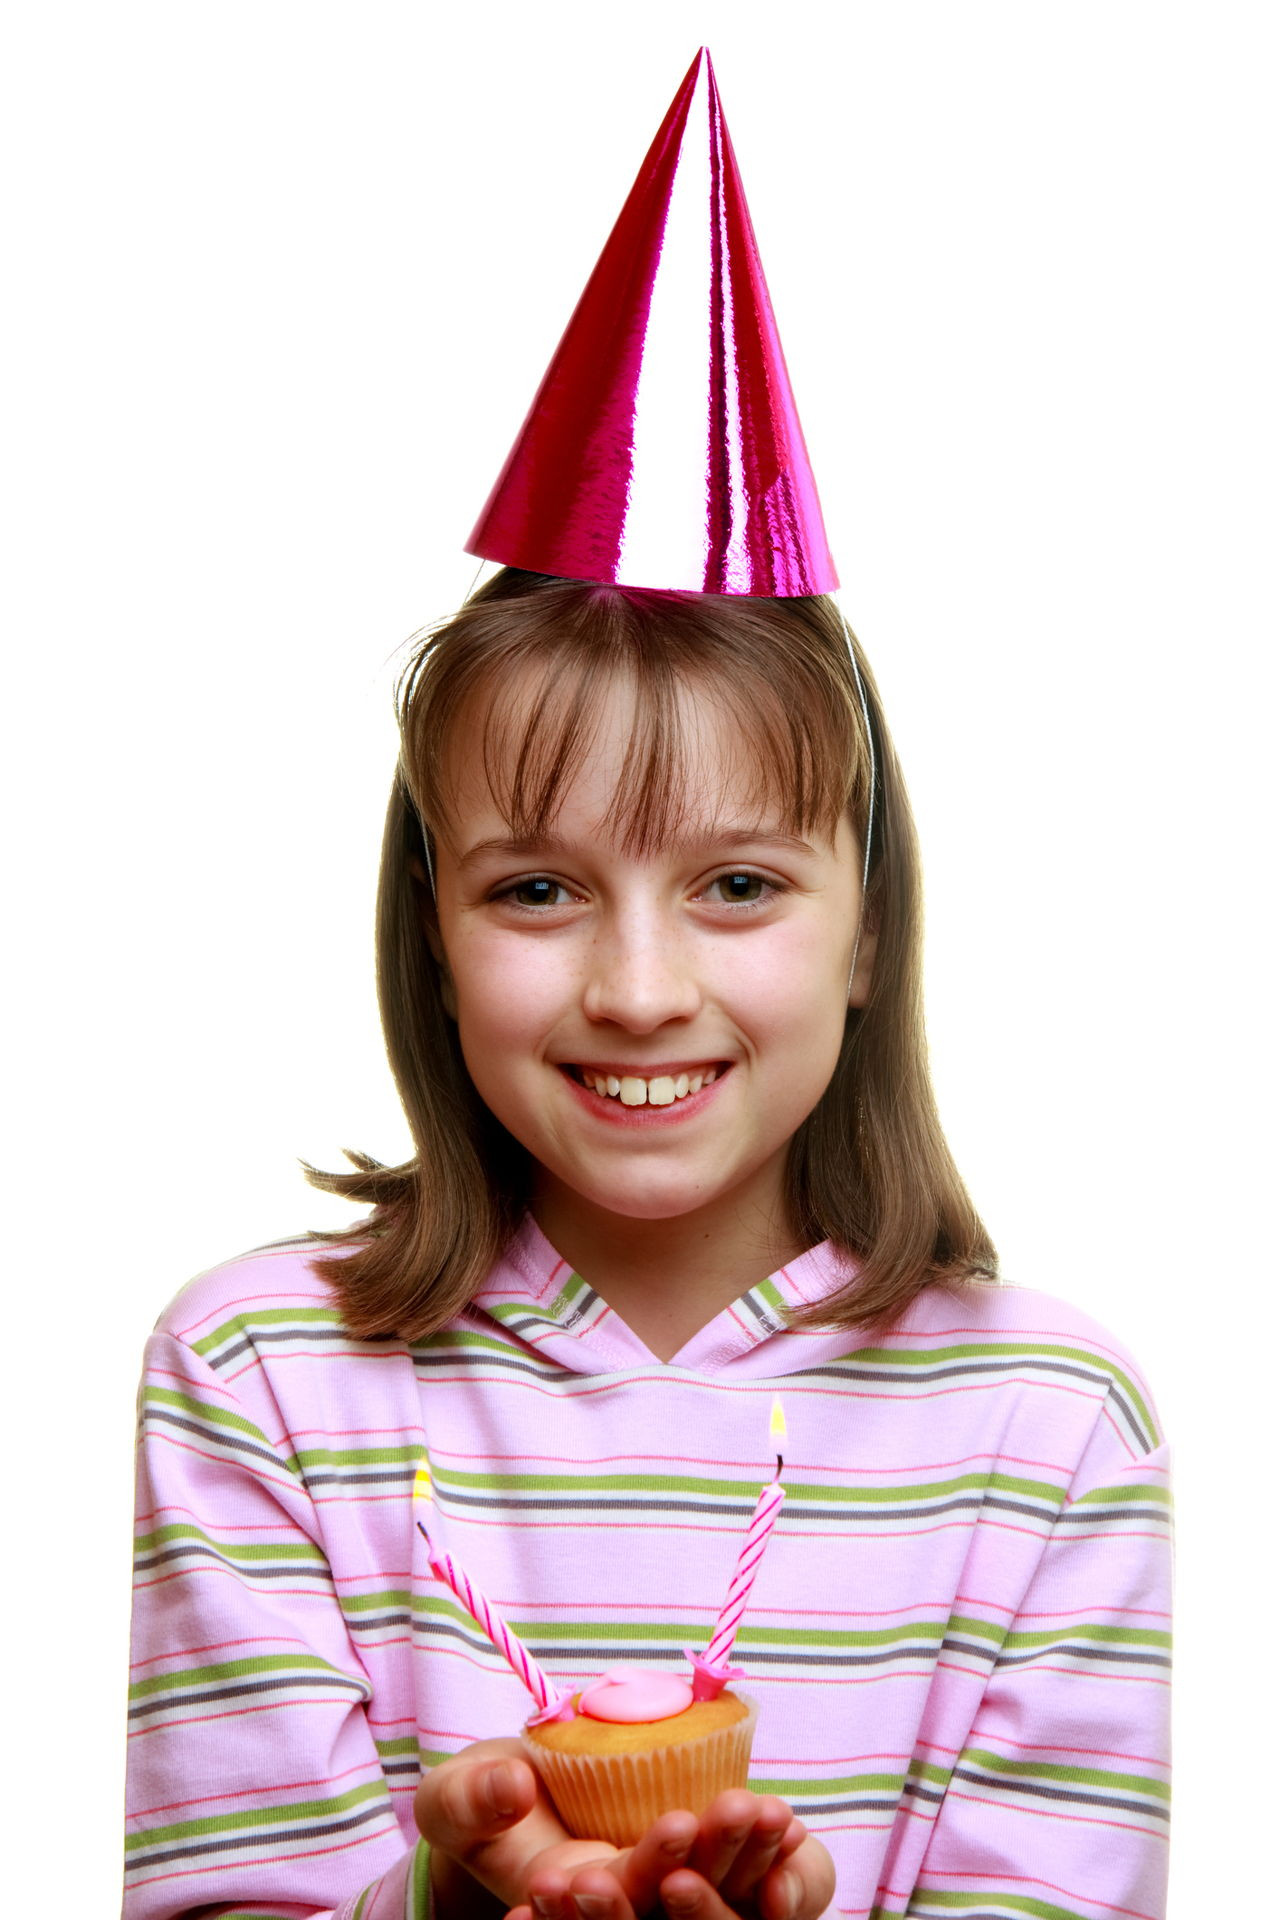 12 Year Old Girl Birthday Party
 Coolest Birthday Party Ideas That are Perfect for 12 Year Olds